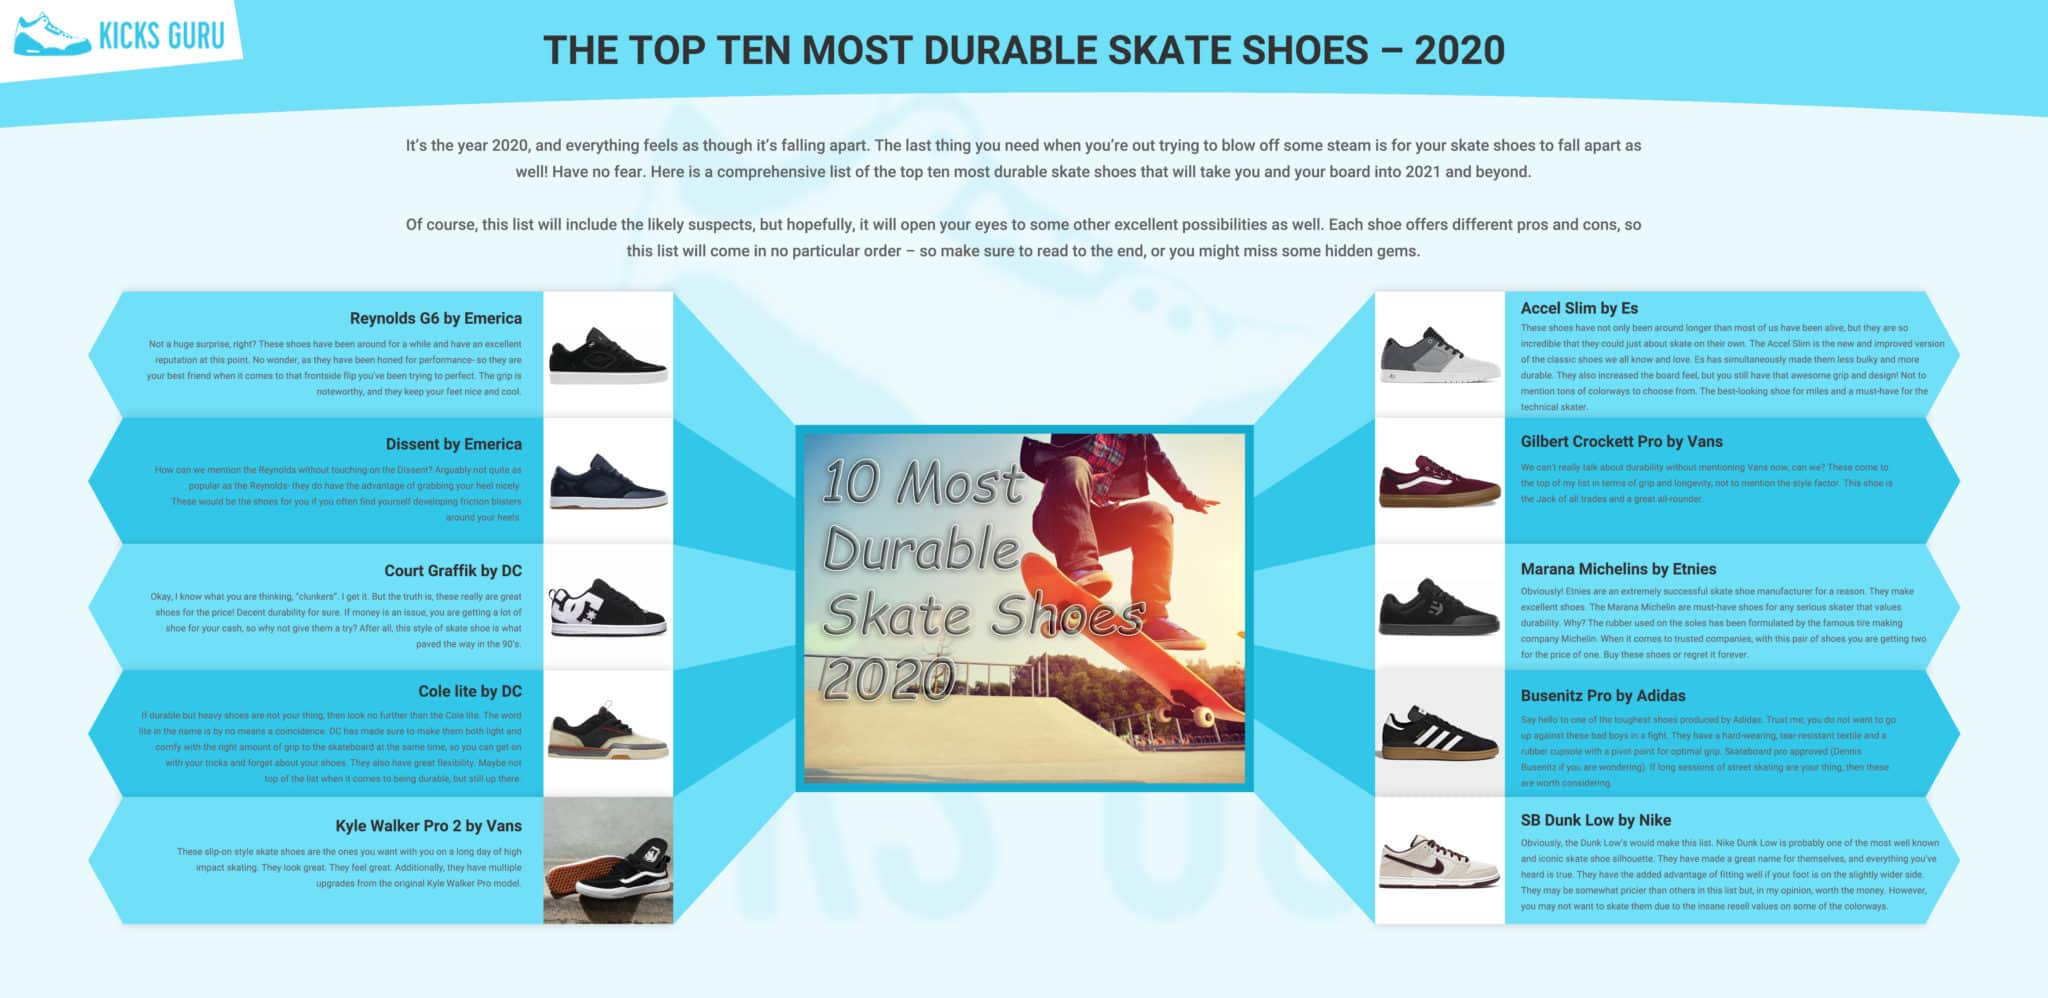 The Top Ten Most Durable Skate Shoes – 2020